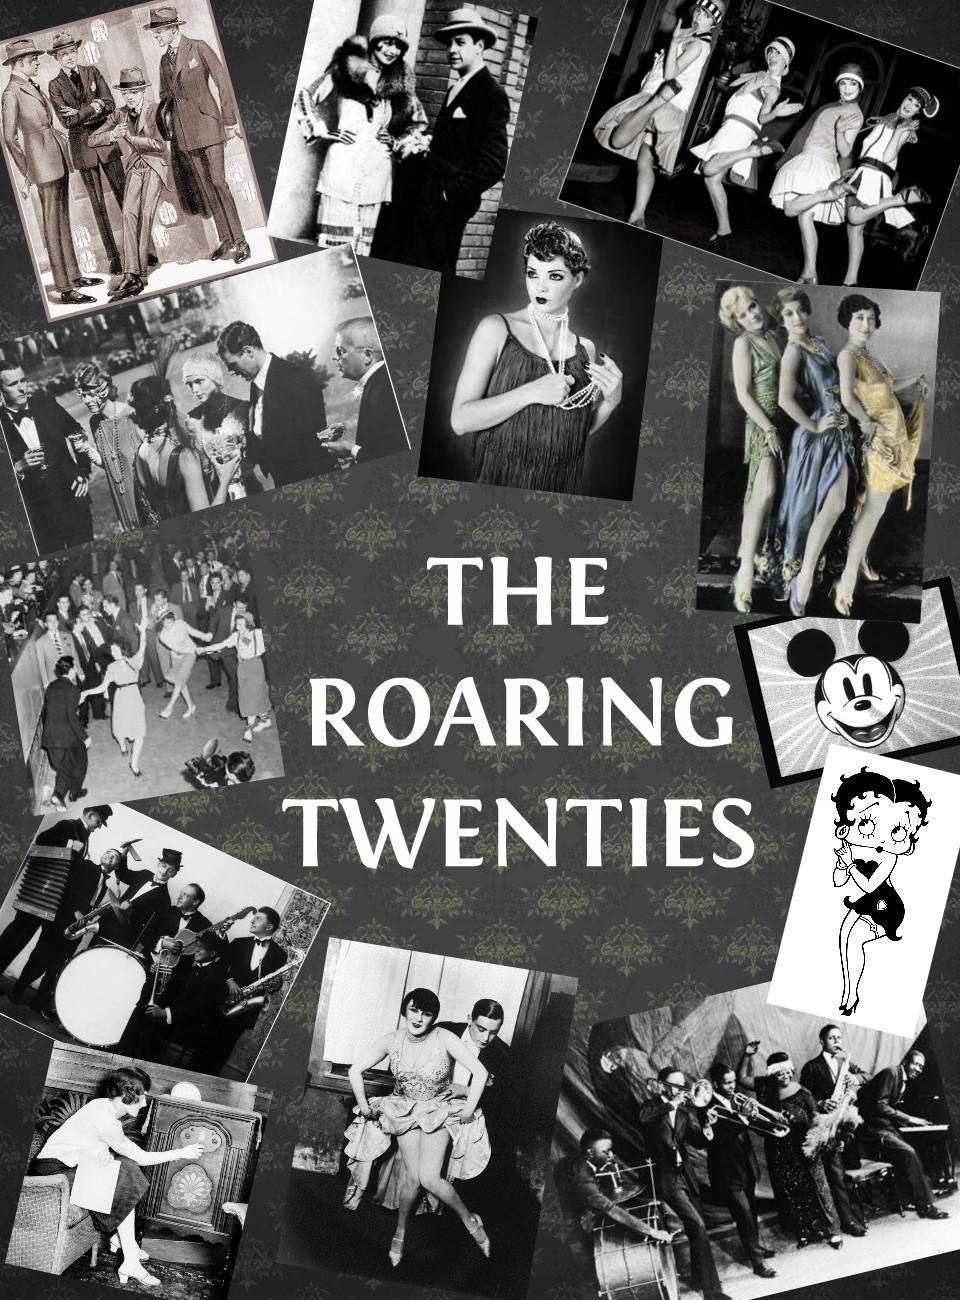 The Roaring Twenties: Culture The 19th amendment was ratified in August 18th, 1920.